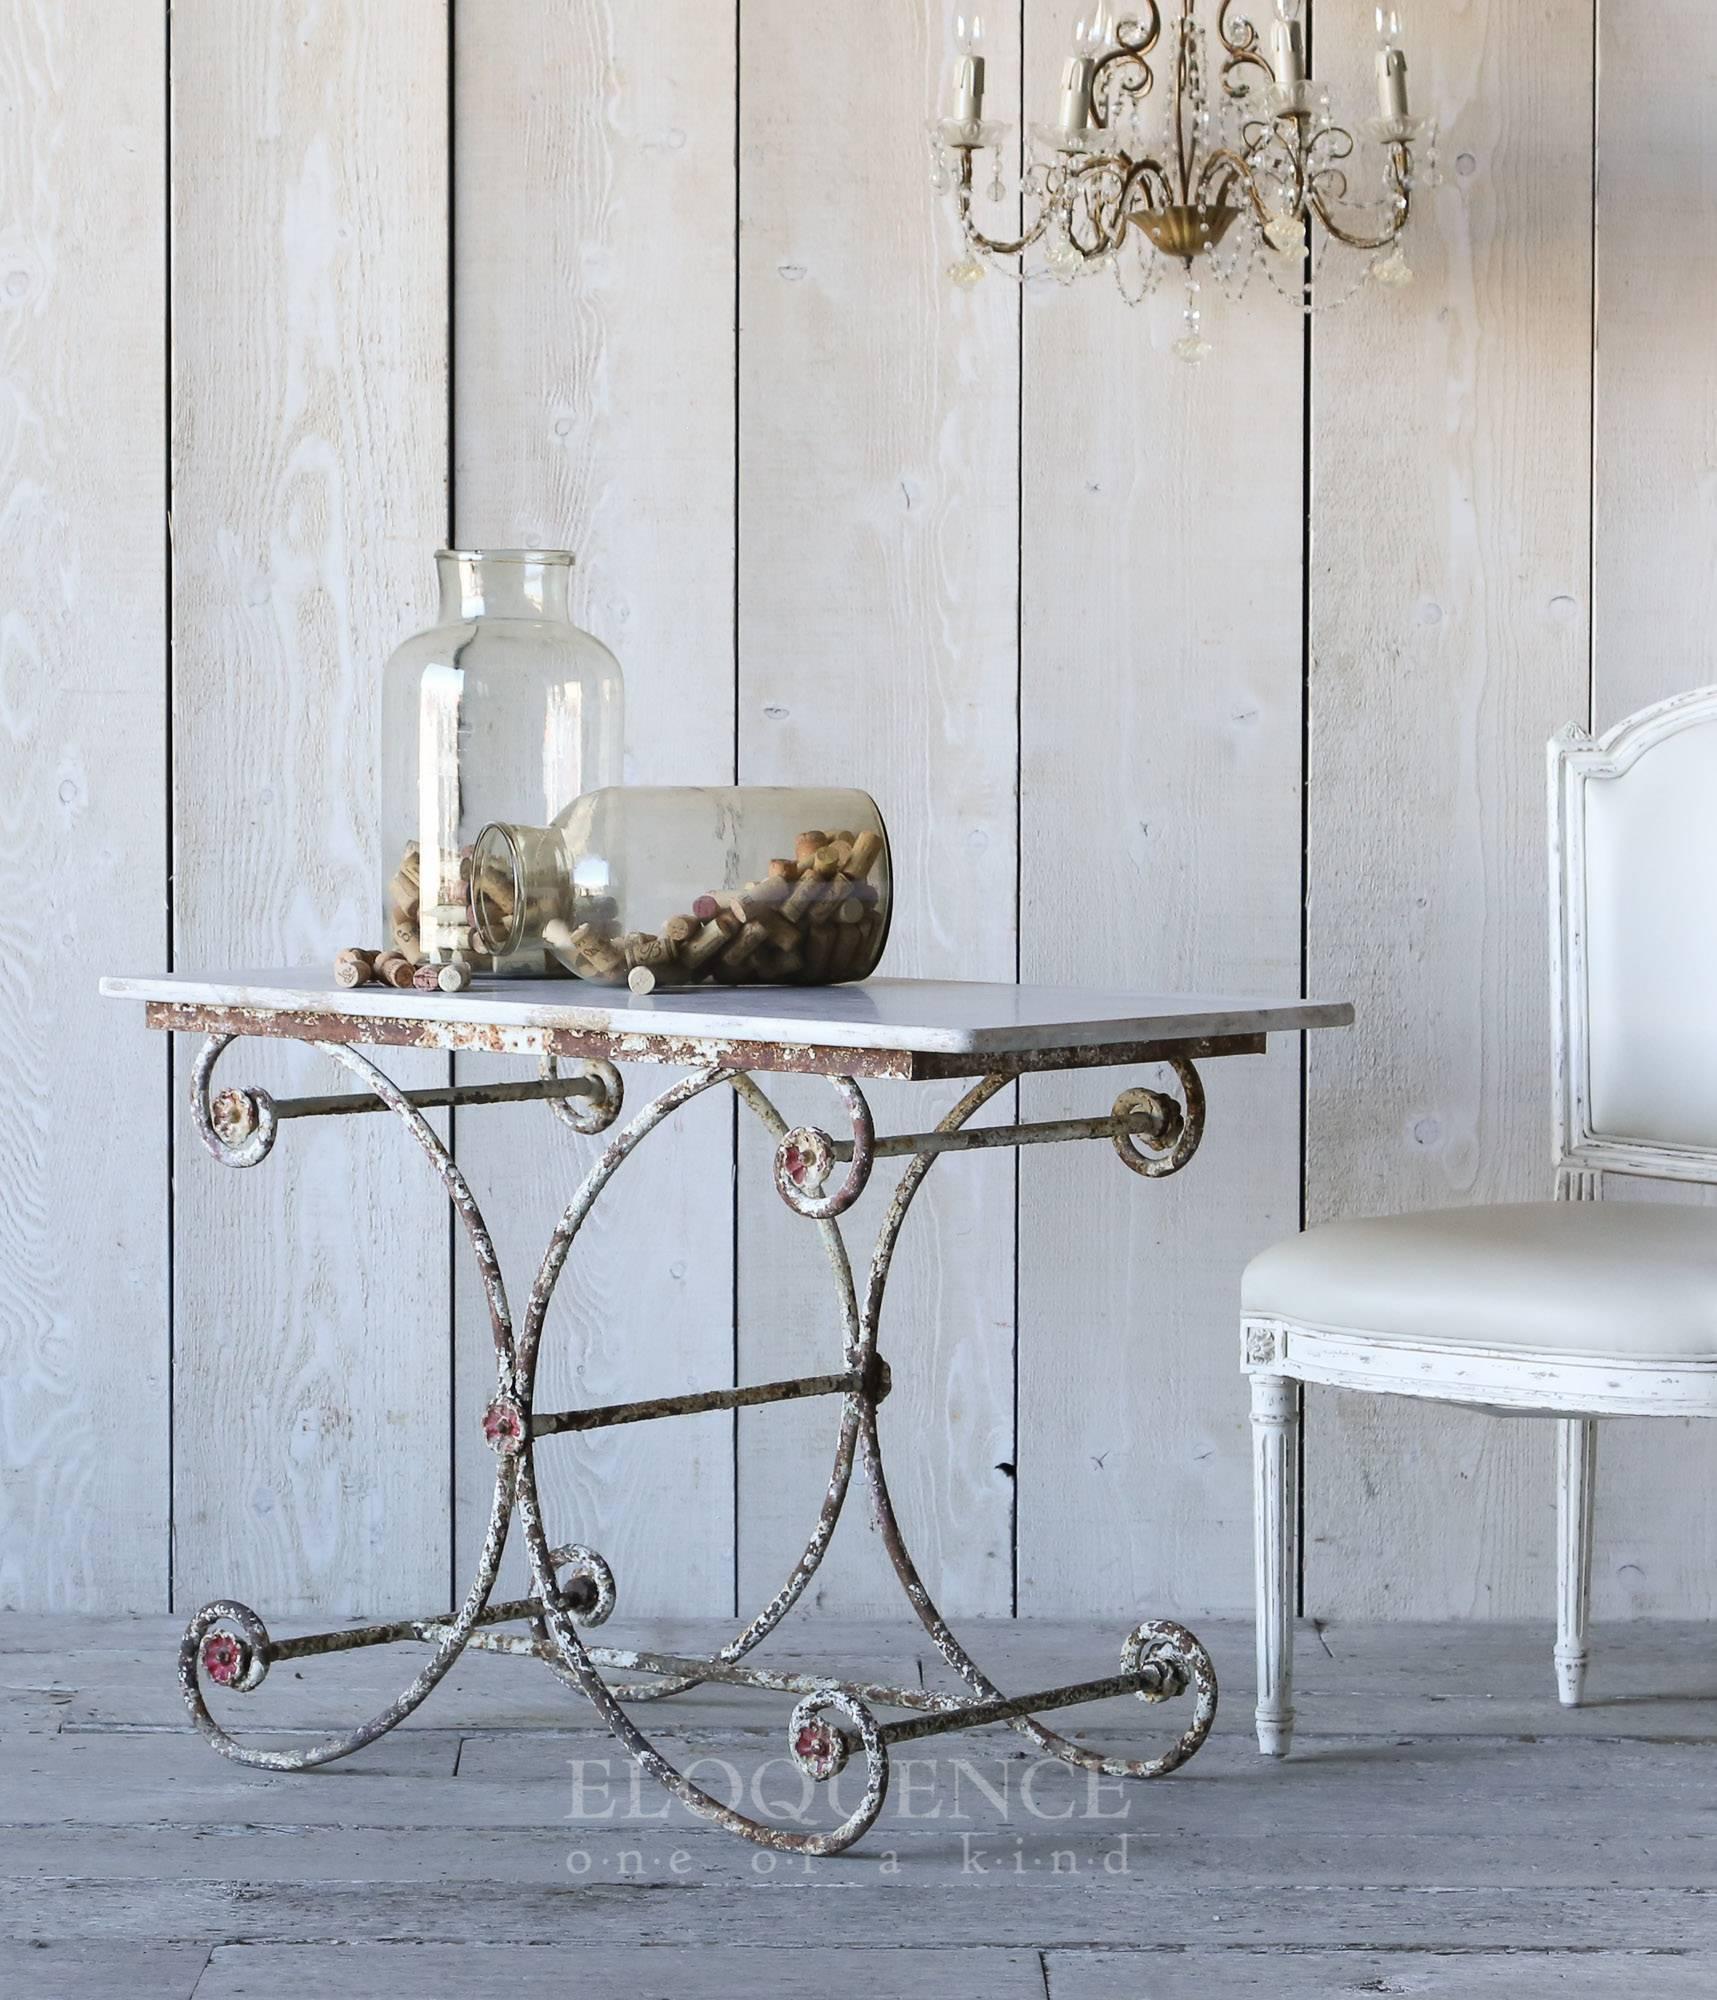 Darling antique scrolling Iron base table. Lovely original marble full of age and patina. Perfectly chipped off-white base, revealing rich rustic iron.